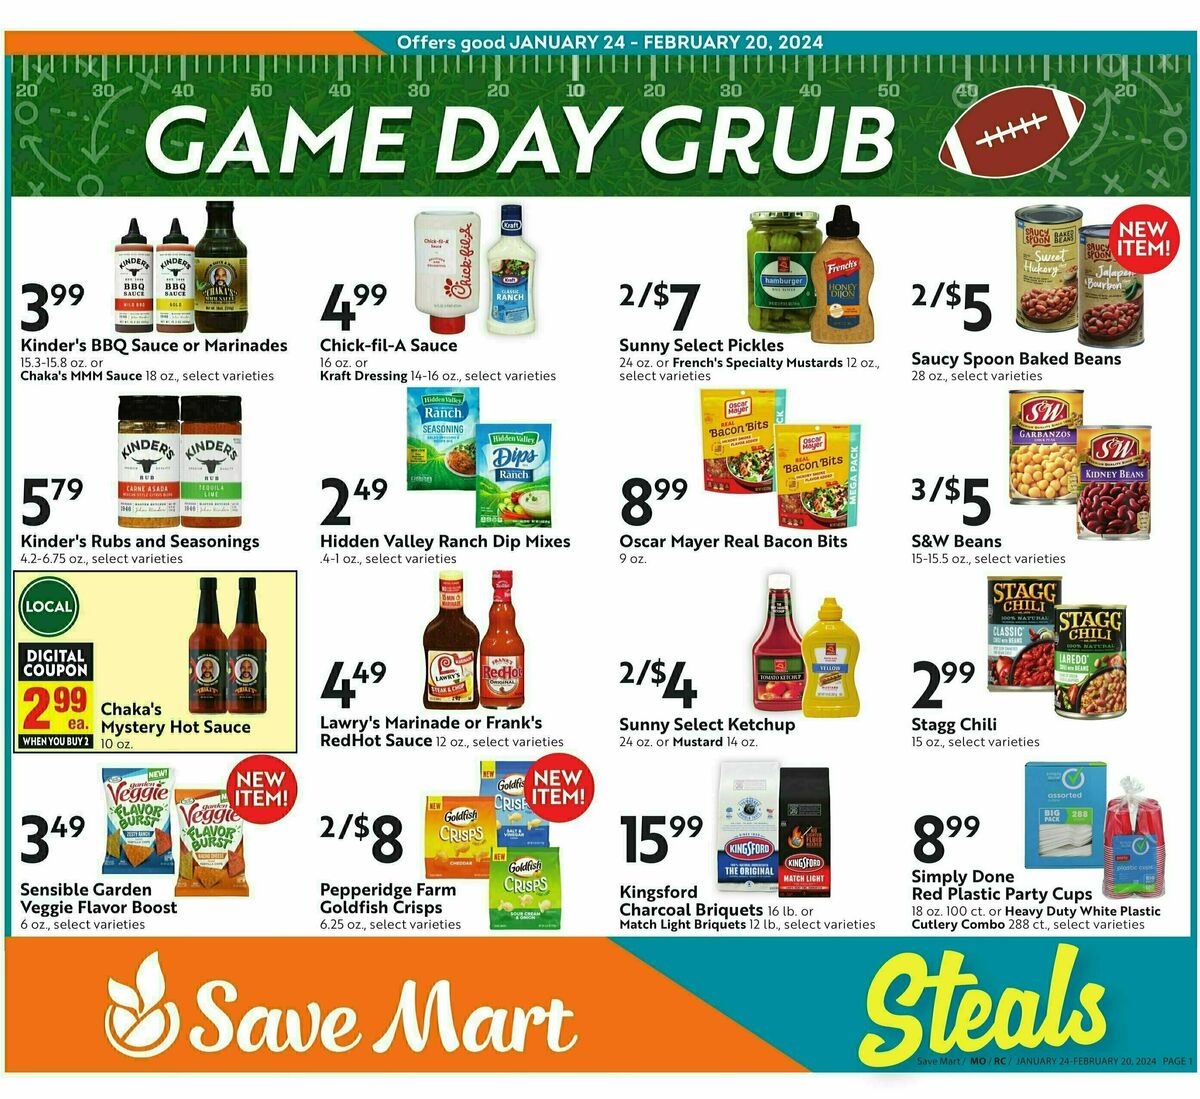 Save Mart Game Day Weekly Ad from January 24